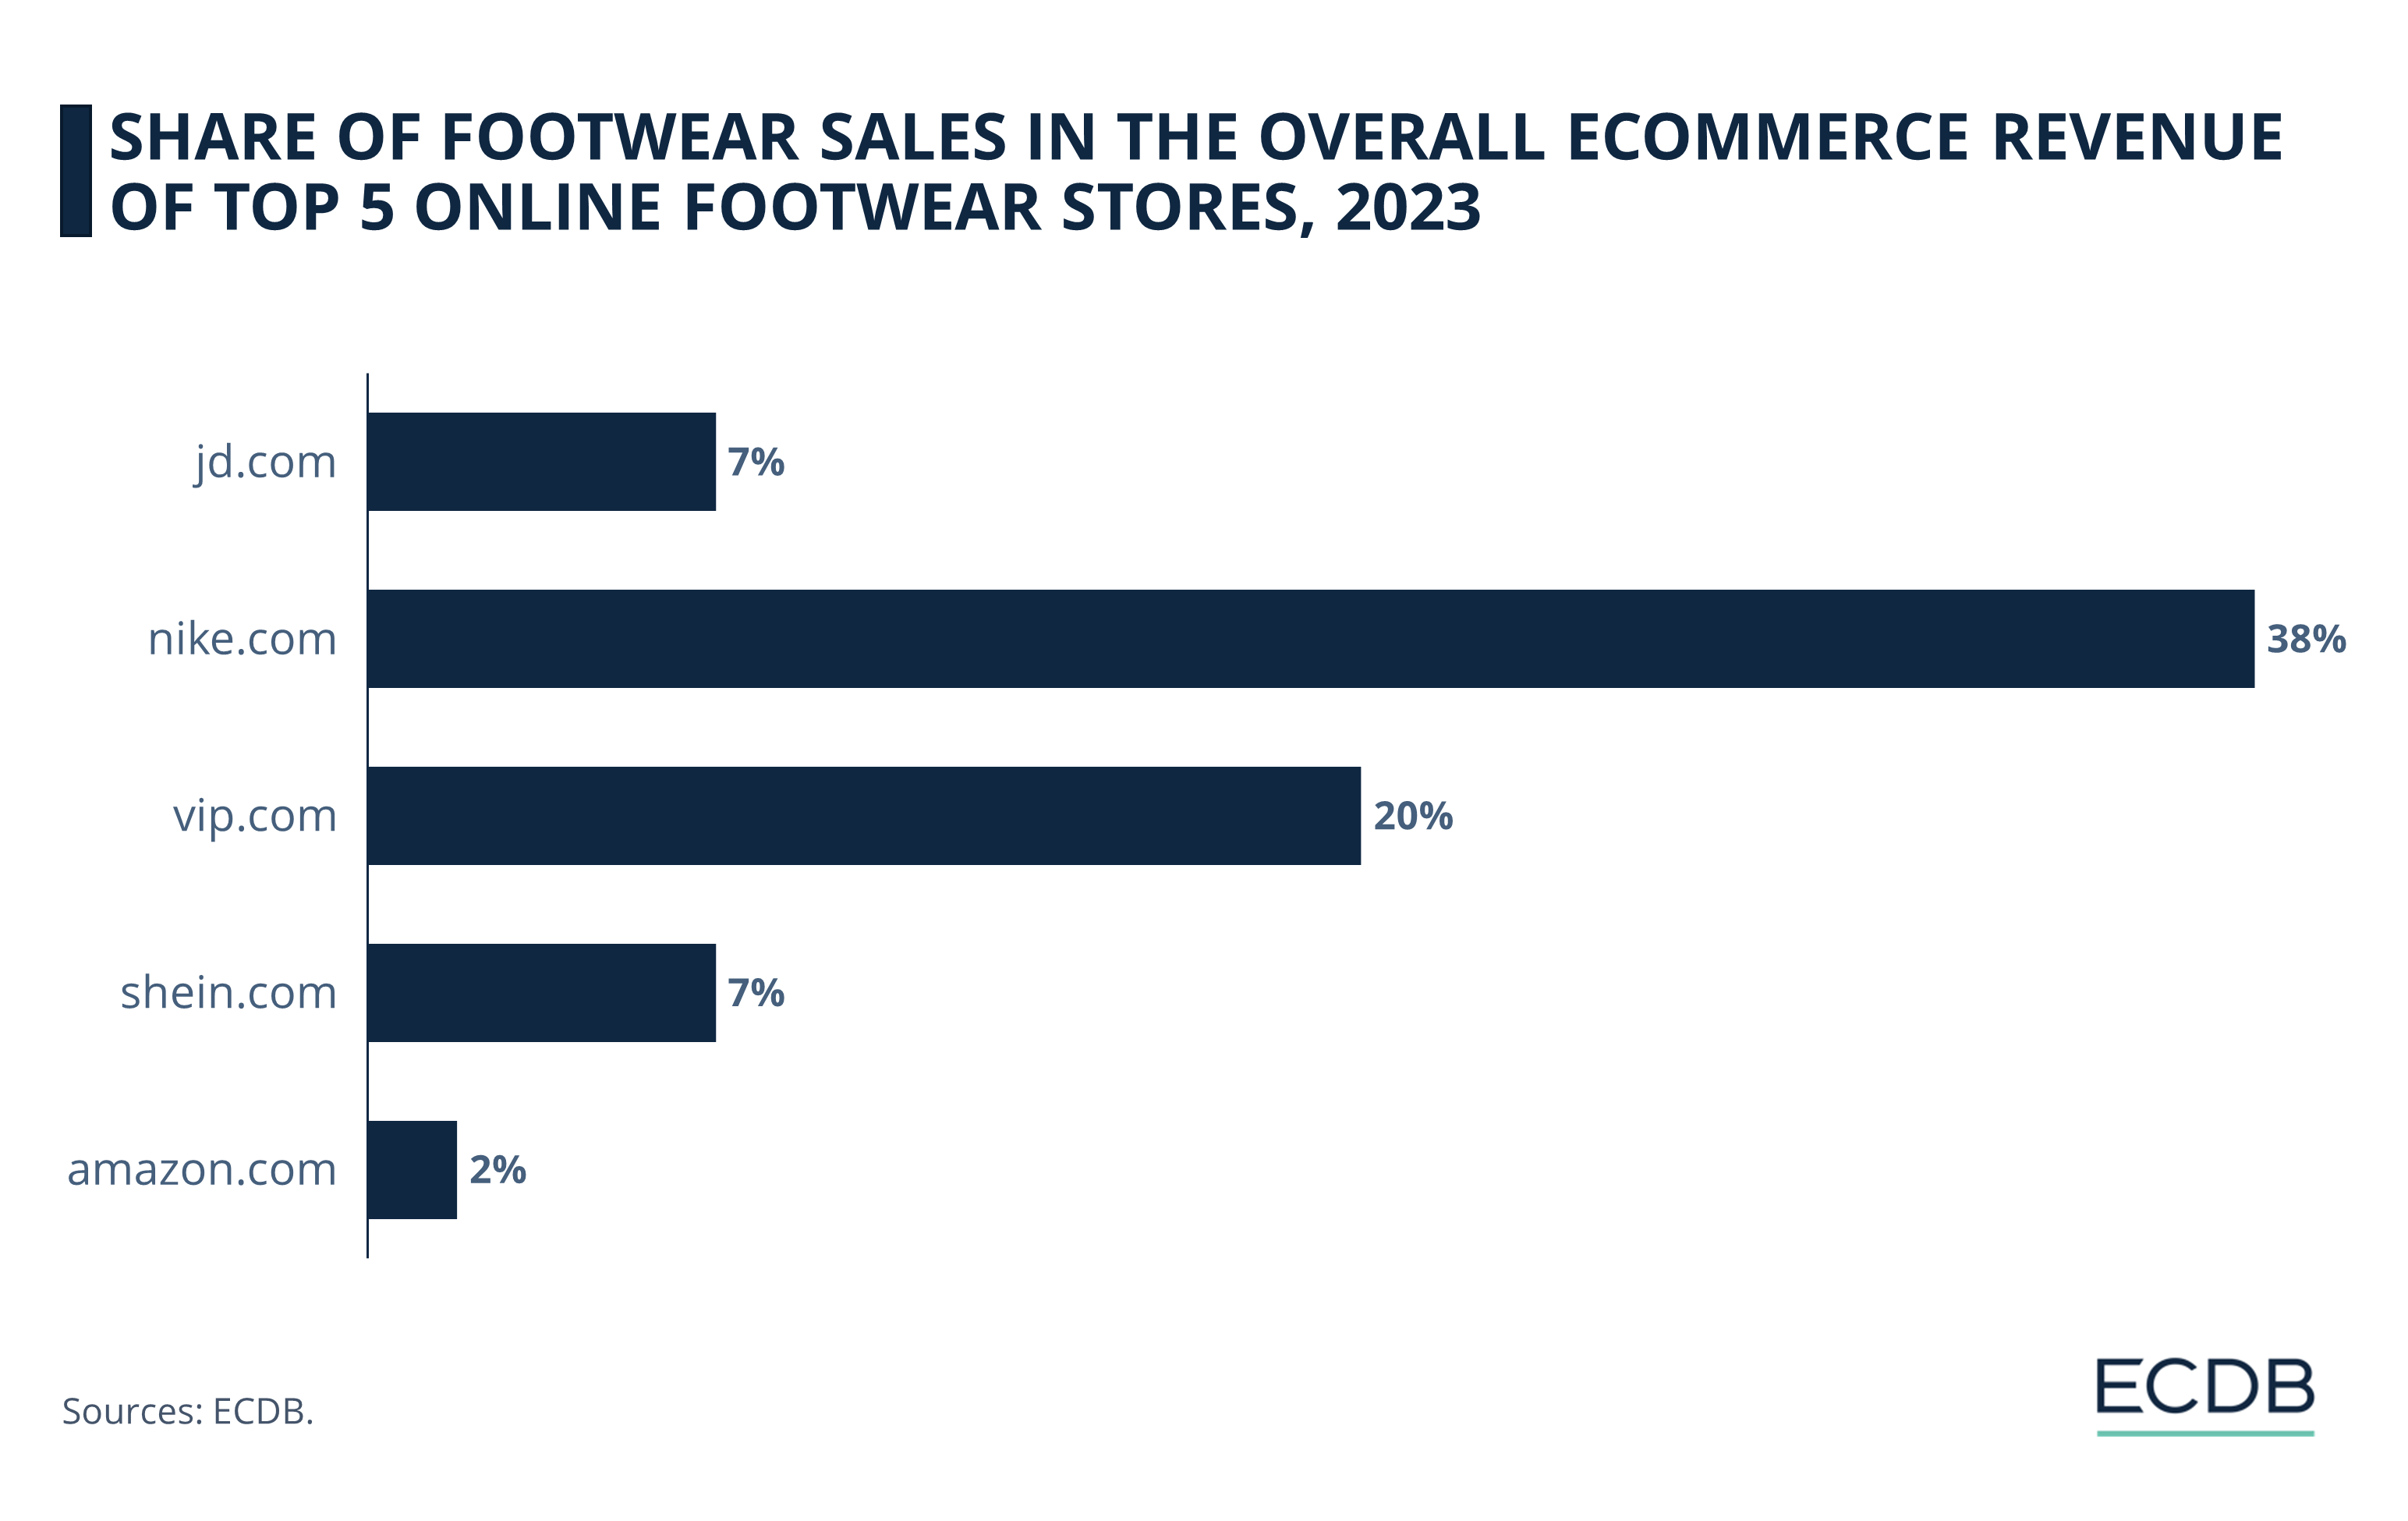 Share of Footwear Sales in the Overall eCommerce Revenue of Top 5 Online Footwear Stores, 2023